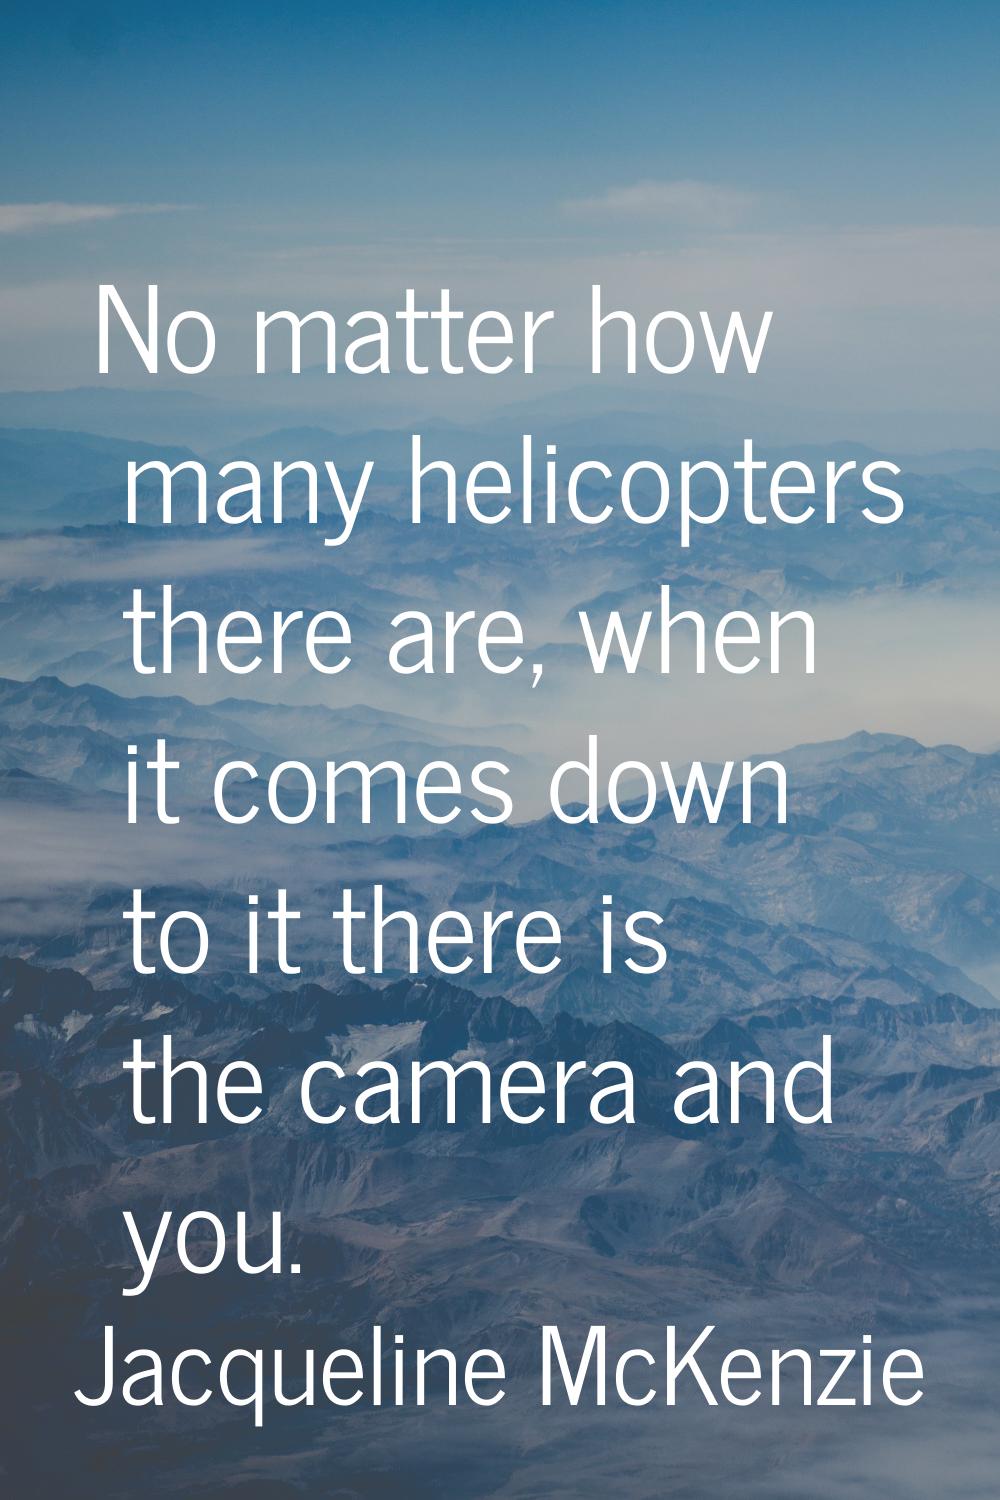 No matter how many helicopters there are, when it comes down to it there is the camera and you.